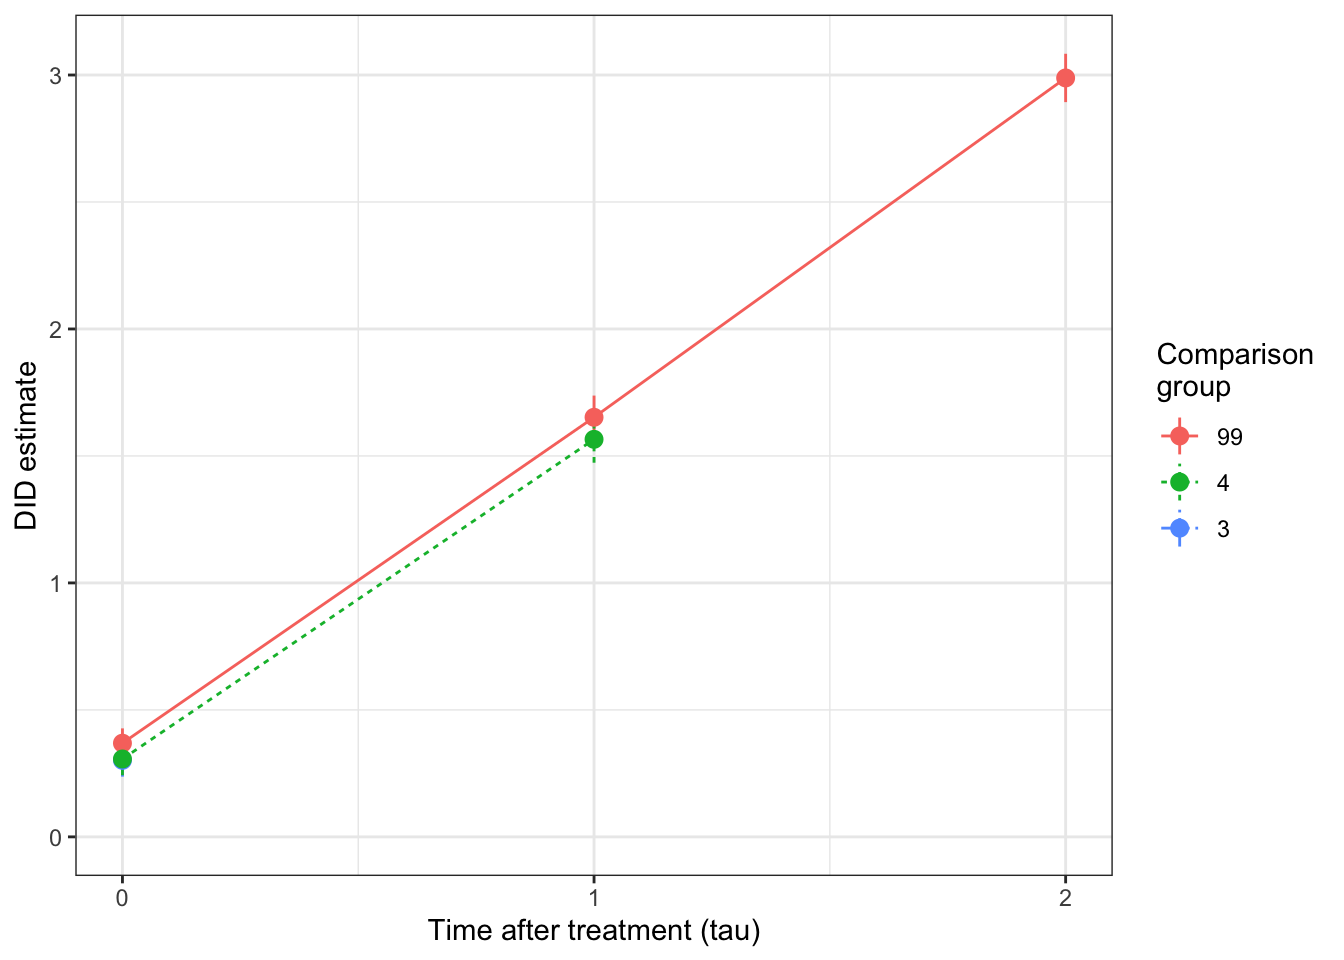 DID estimates for Group 2 at various time periods after the treament and with various comparison groups and with the reference period $\tau'=1$